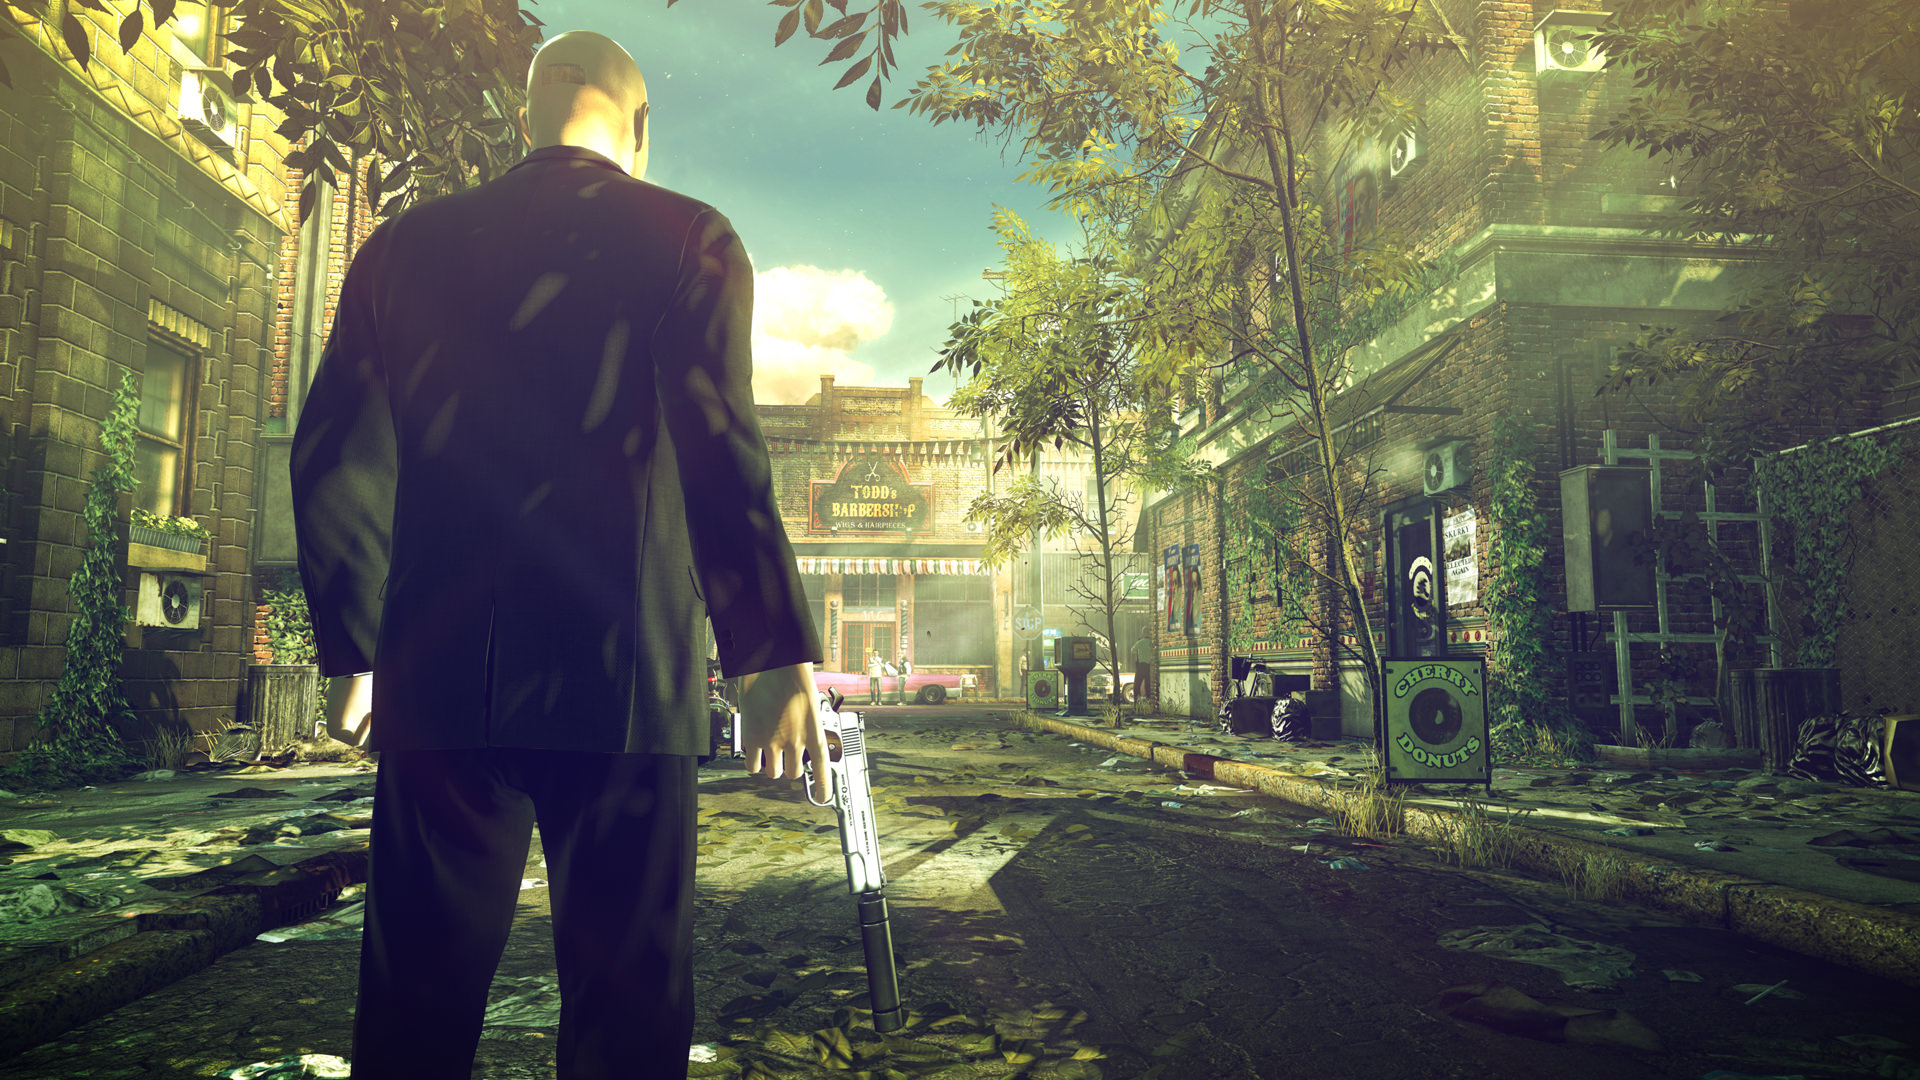 Hitman 5 Absolution Compressed PC Game Free Download 10.3 GB